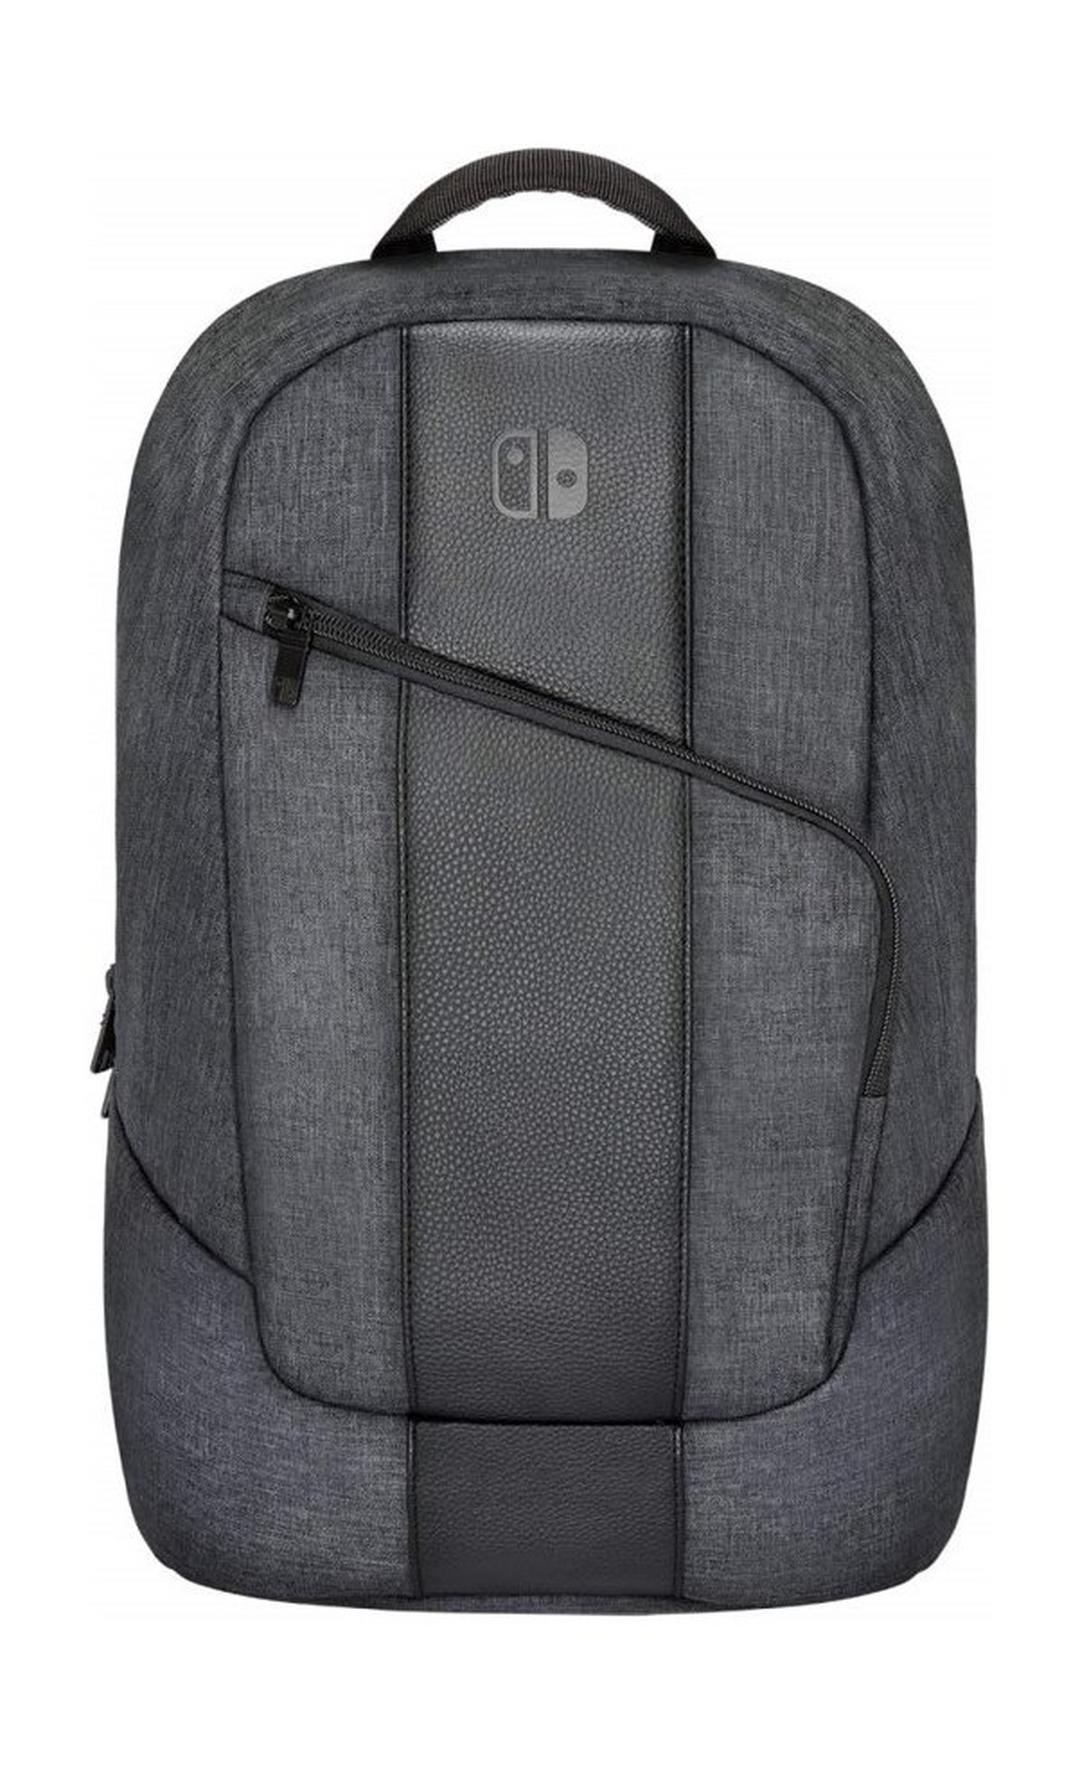 Nintendo Switch System 15-inch Backpack - Elite Edition